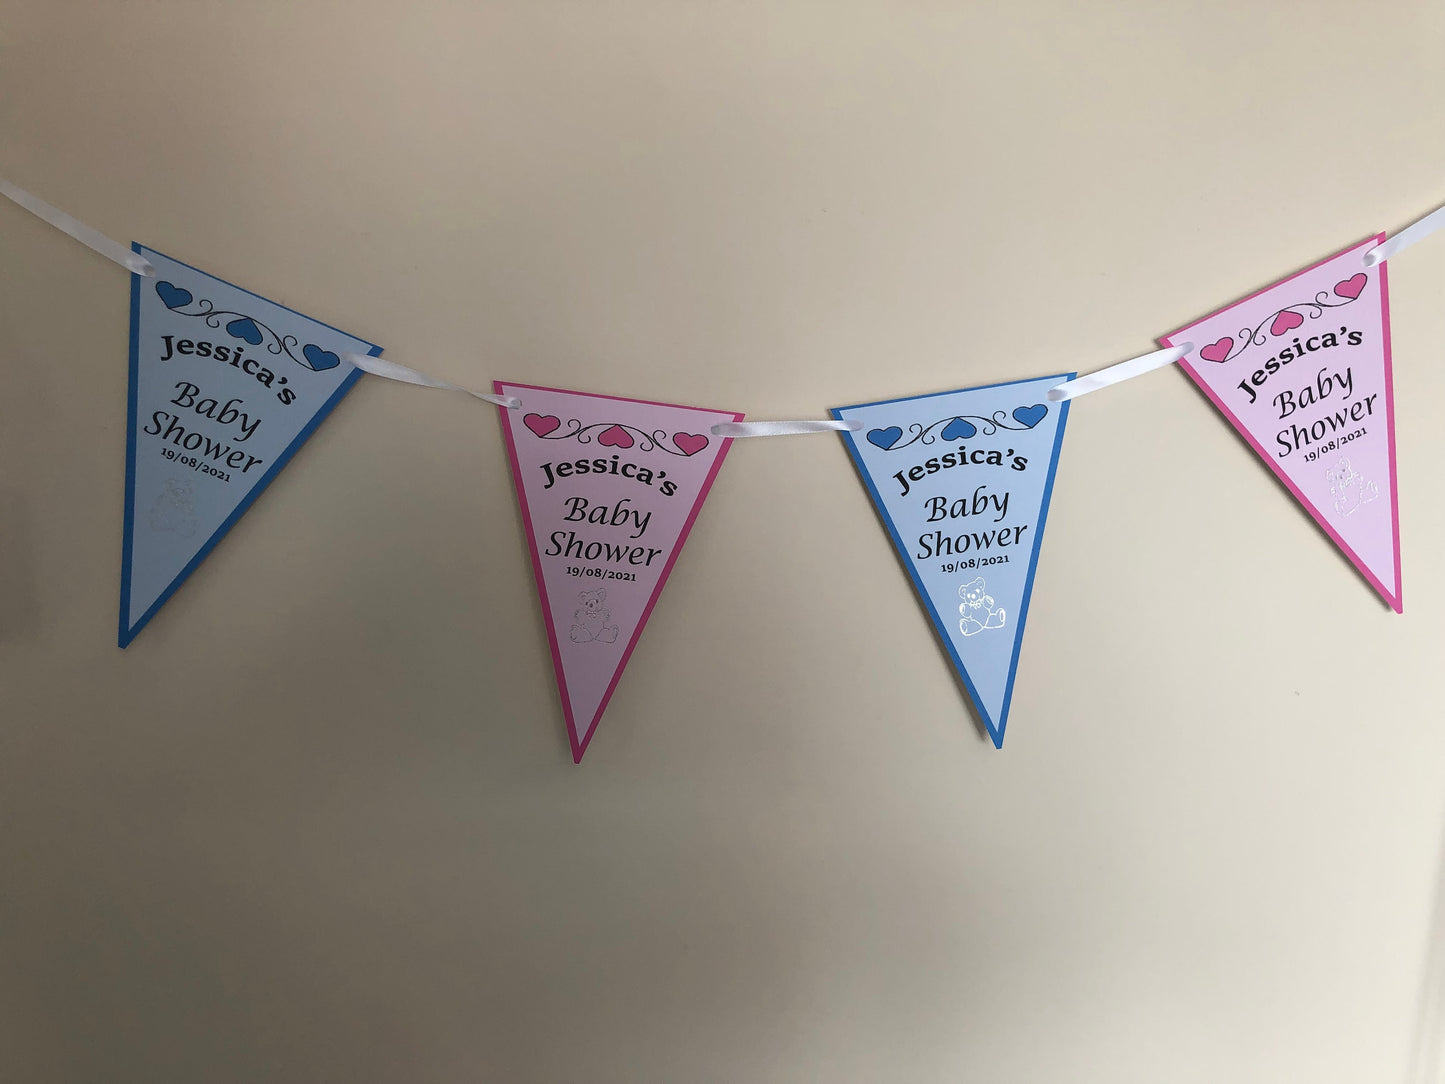 Baby Shower Bunting Flags 10 flags Personalised Garlands